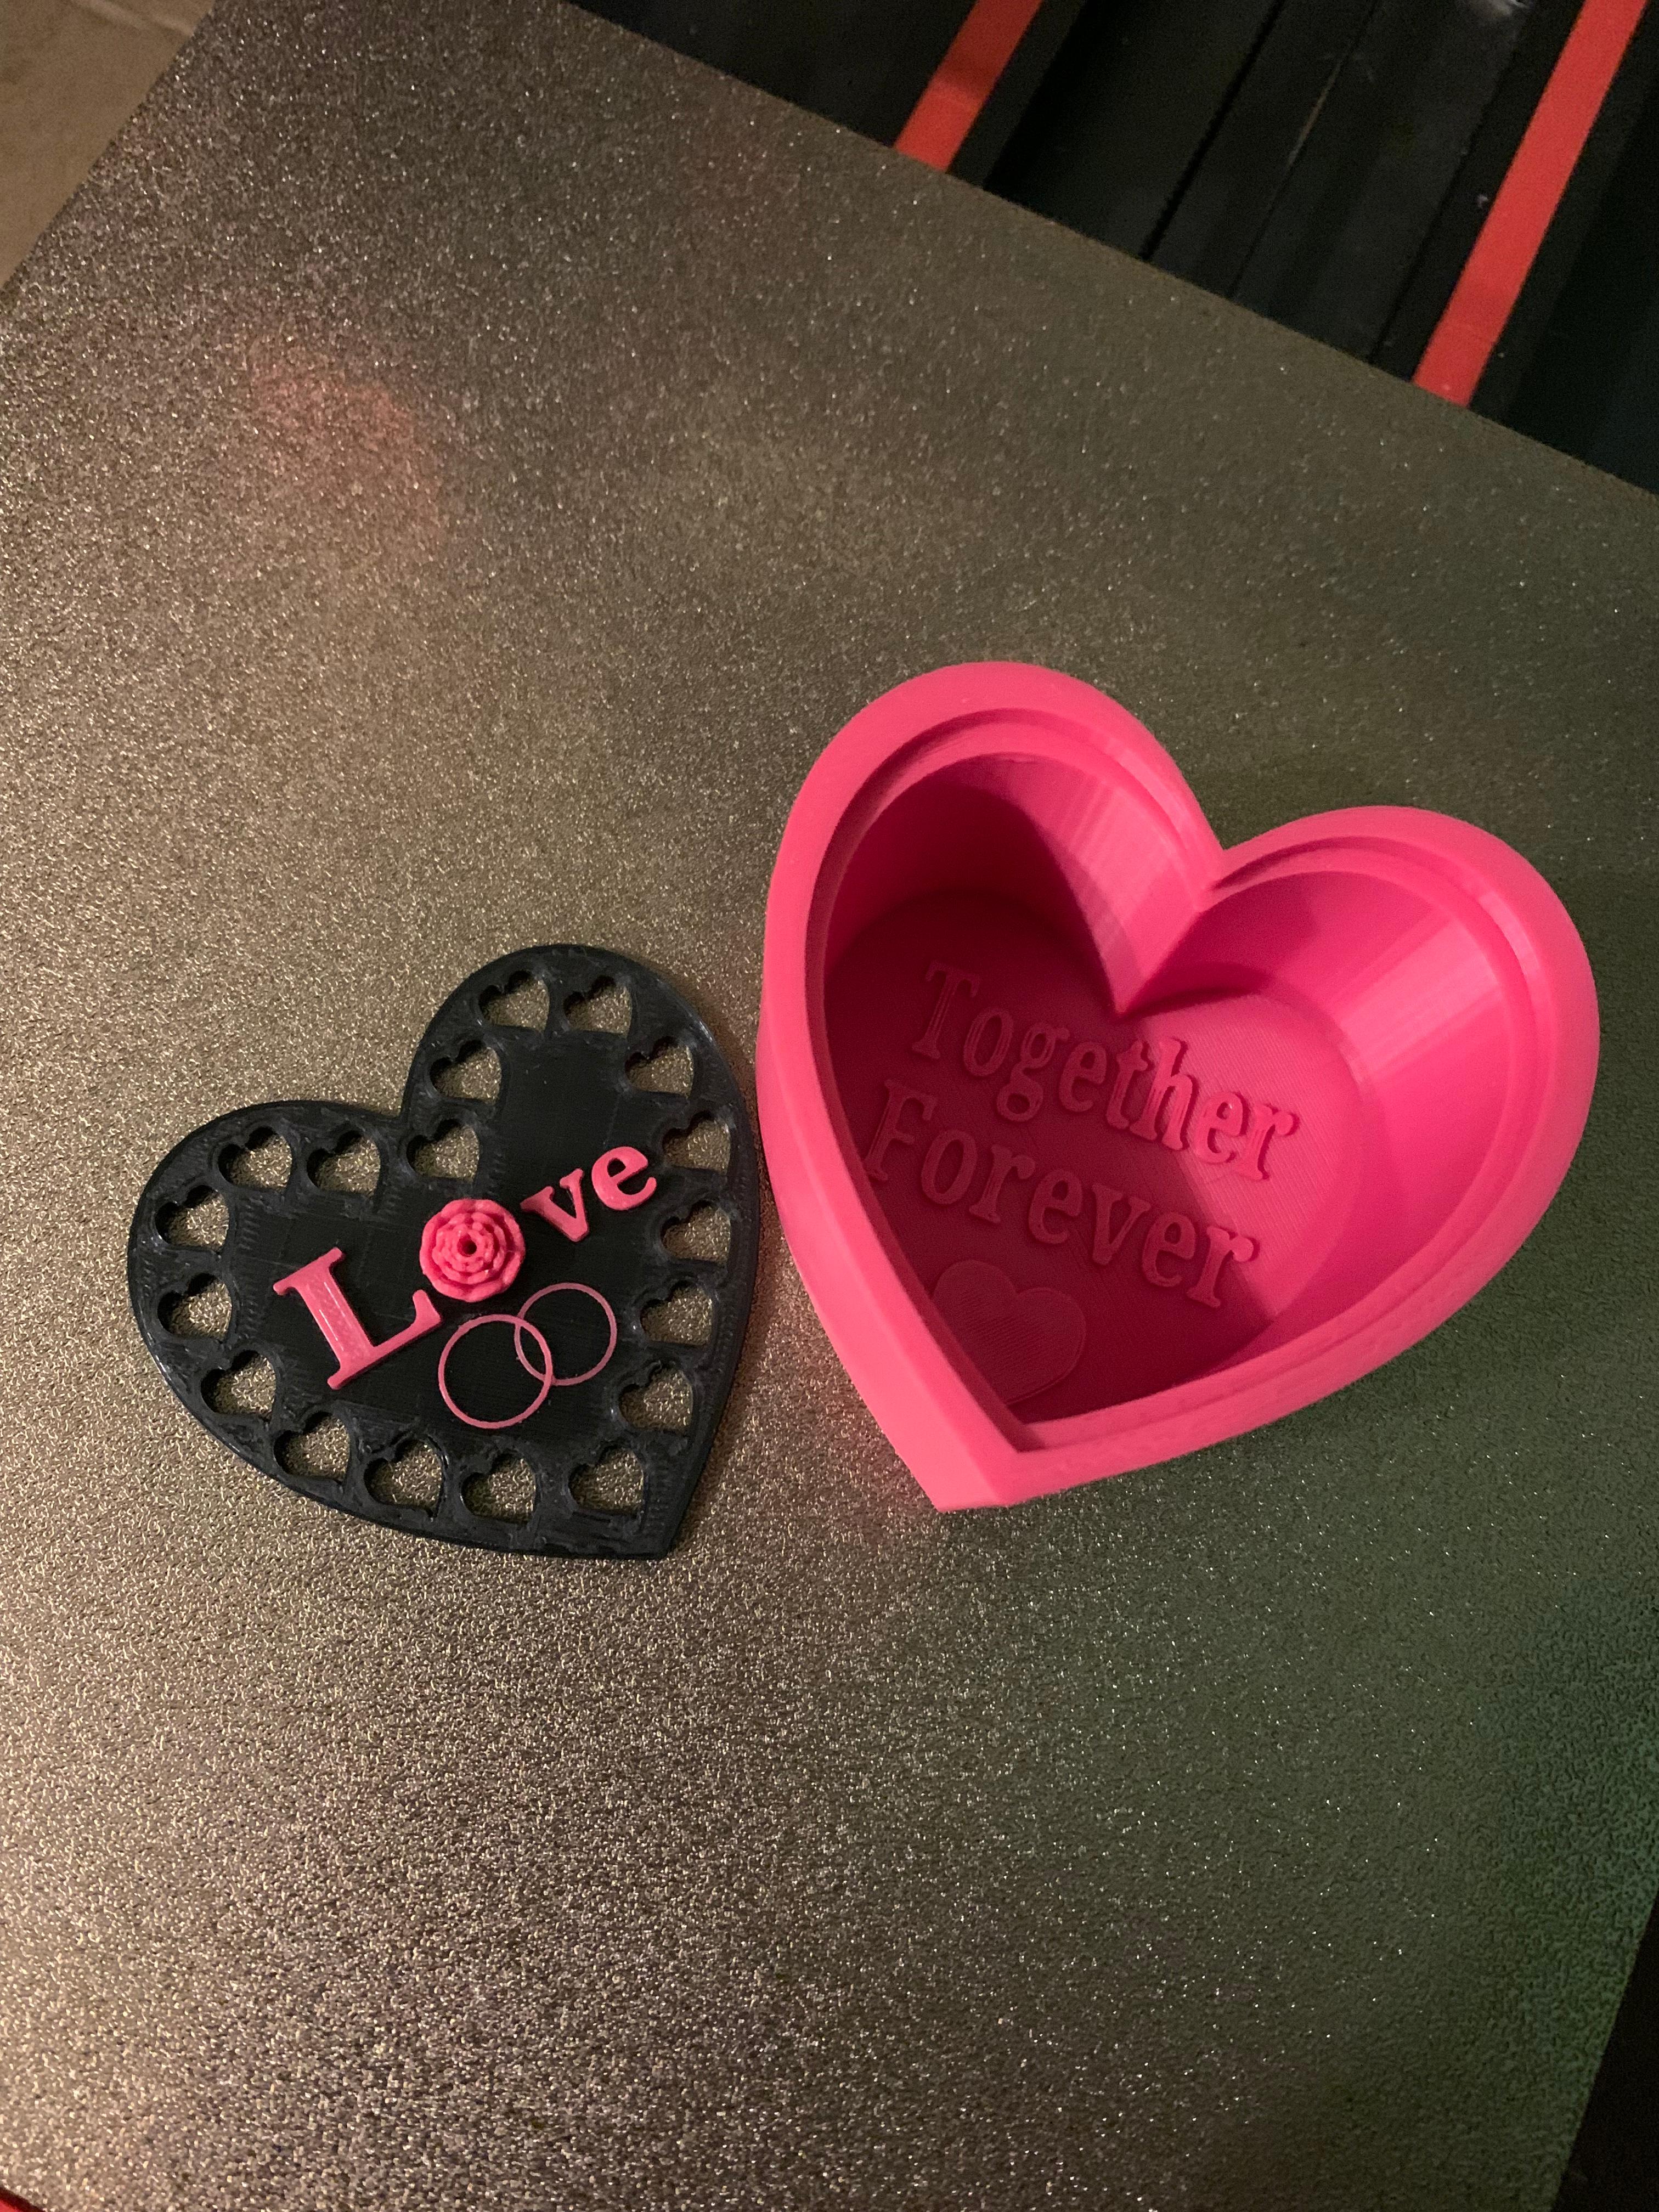 Thangs Valentine's Day Contest Heart Box with Love, Together Forever and Rings - Printed in black and pink. Looks great! My wife loves it! - 3d model